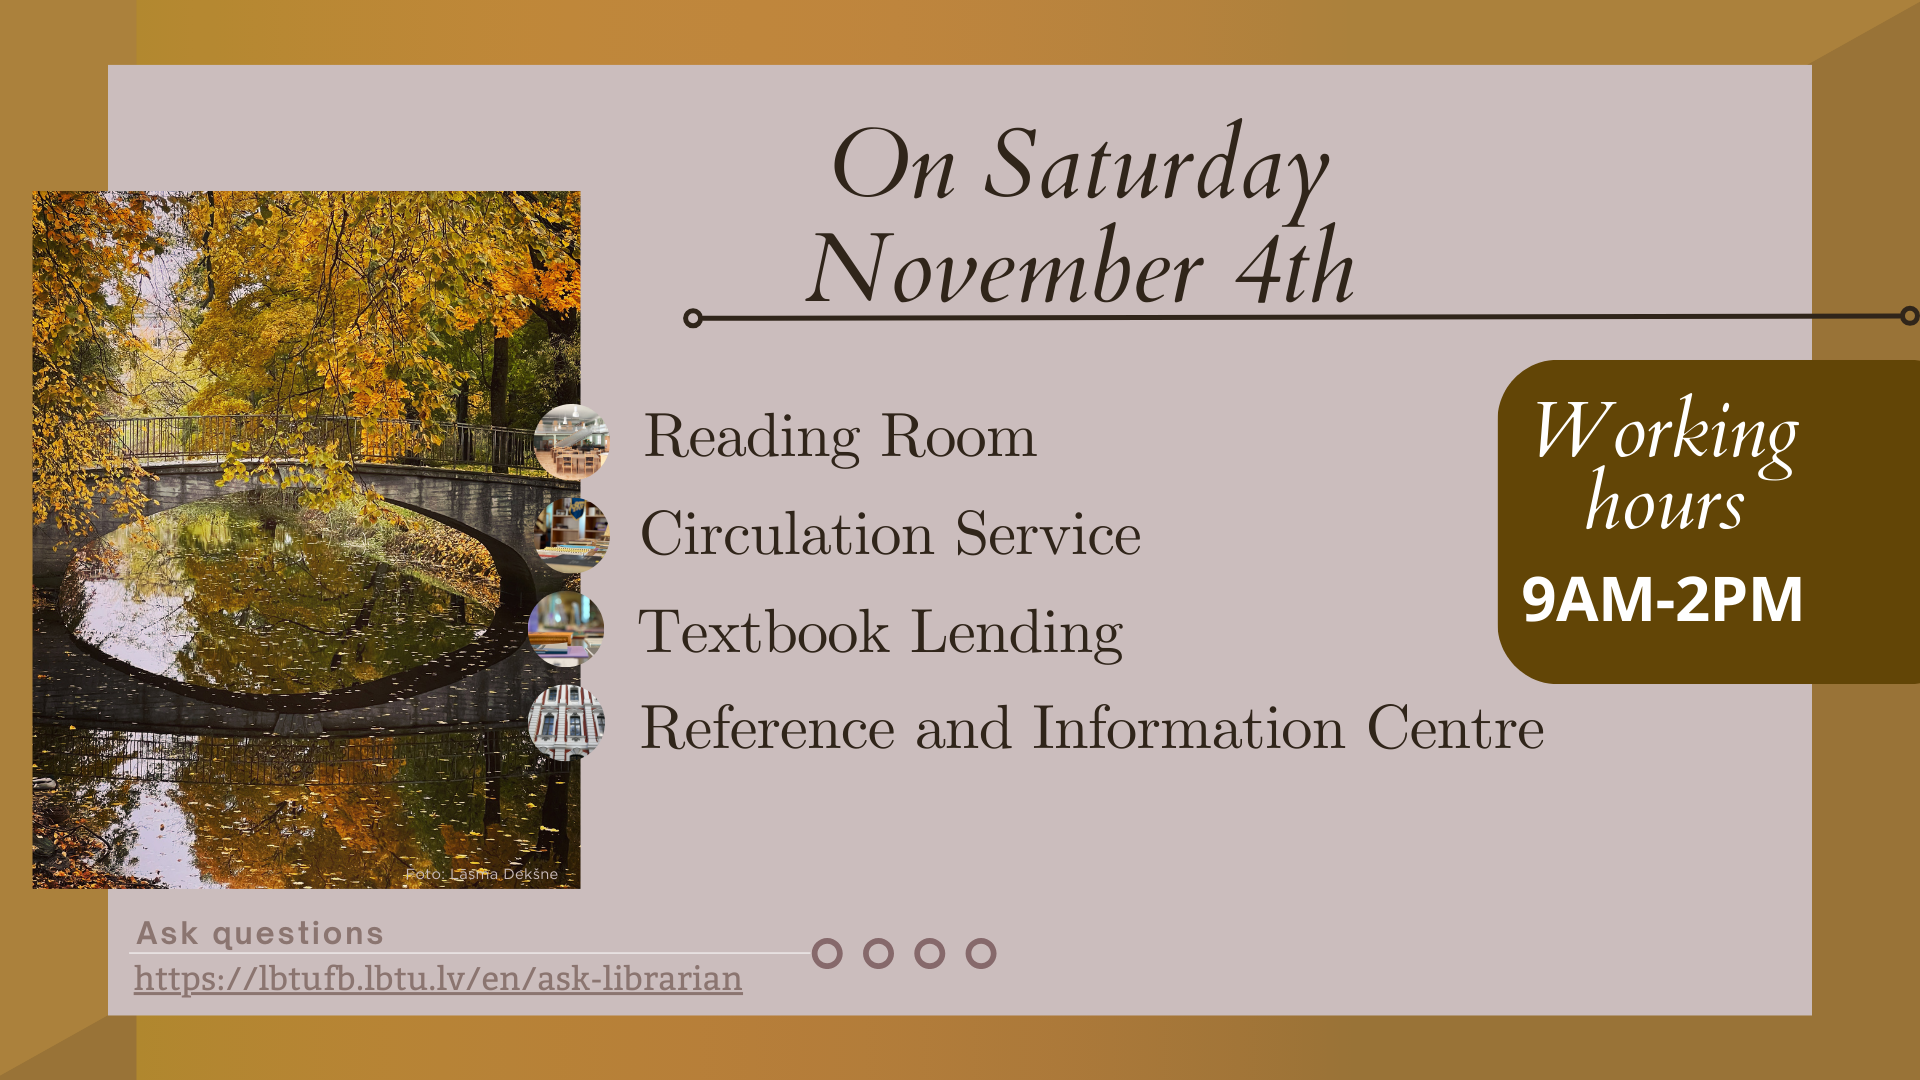 On Saturday, November 4th library is open from 9am until 2pm